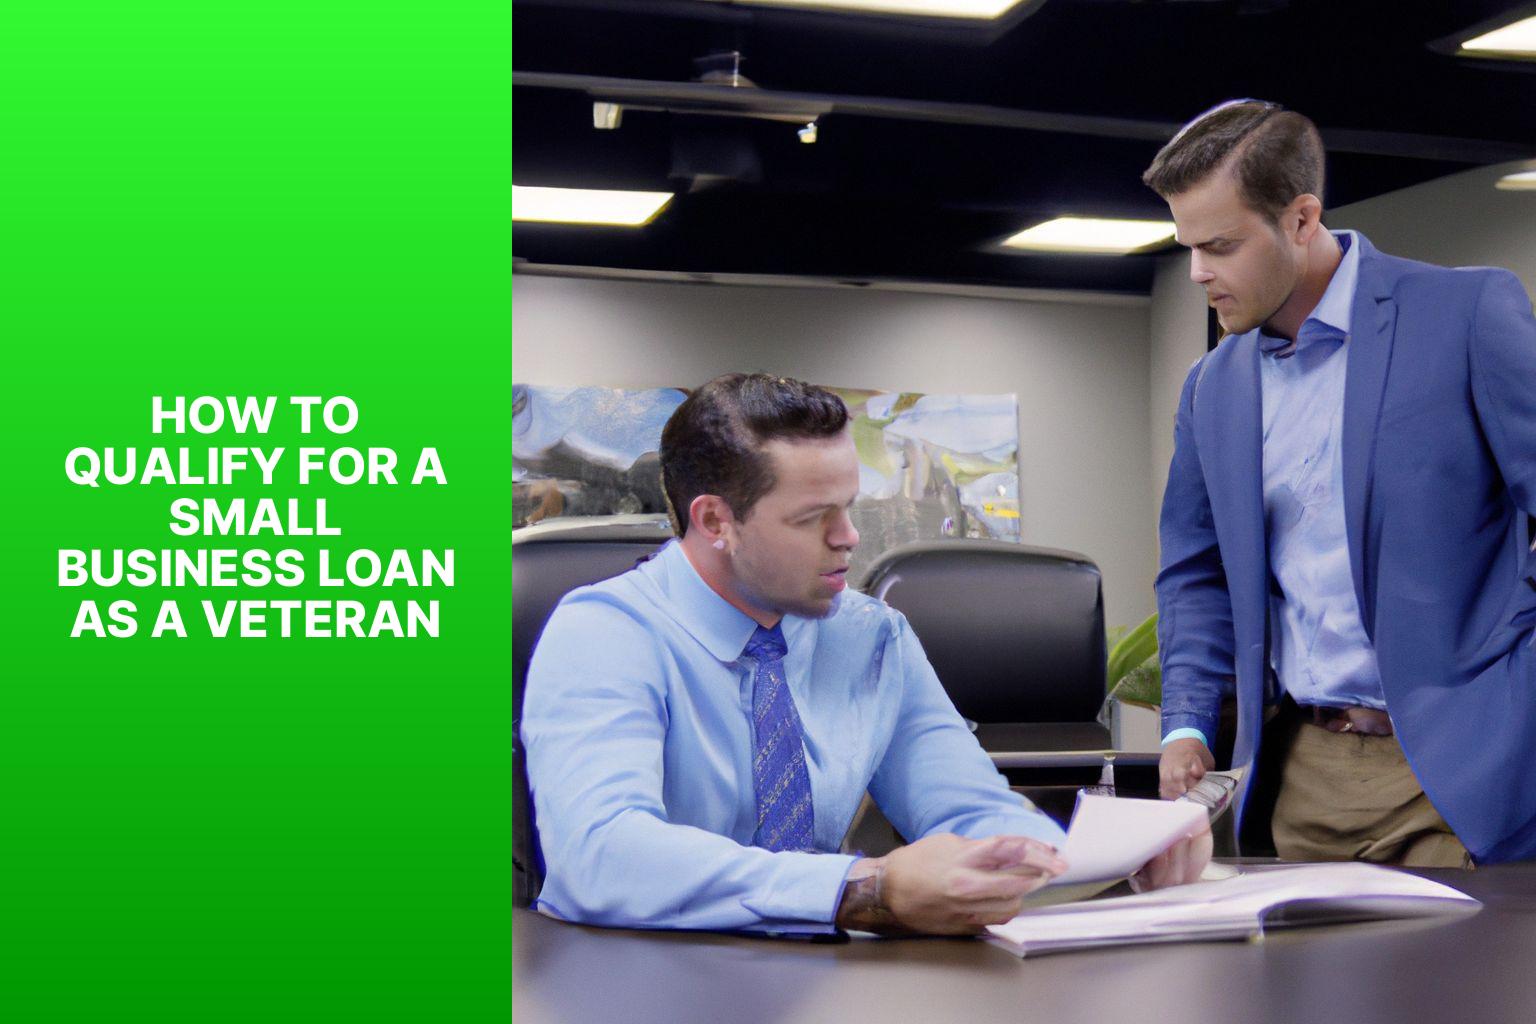 How to Qualify for a Small Business Loan as a Veteran - Veterans in Ventures: How Does a Veteran Get a Small Business Loan? 